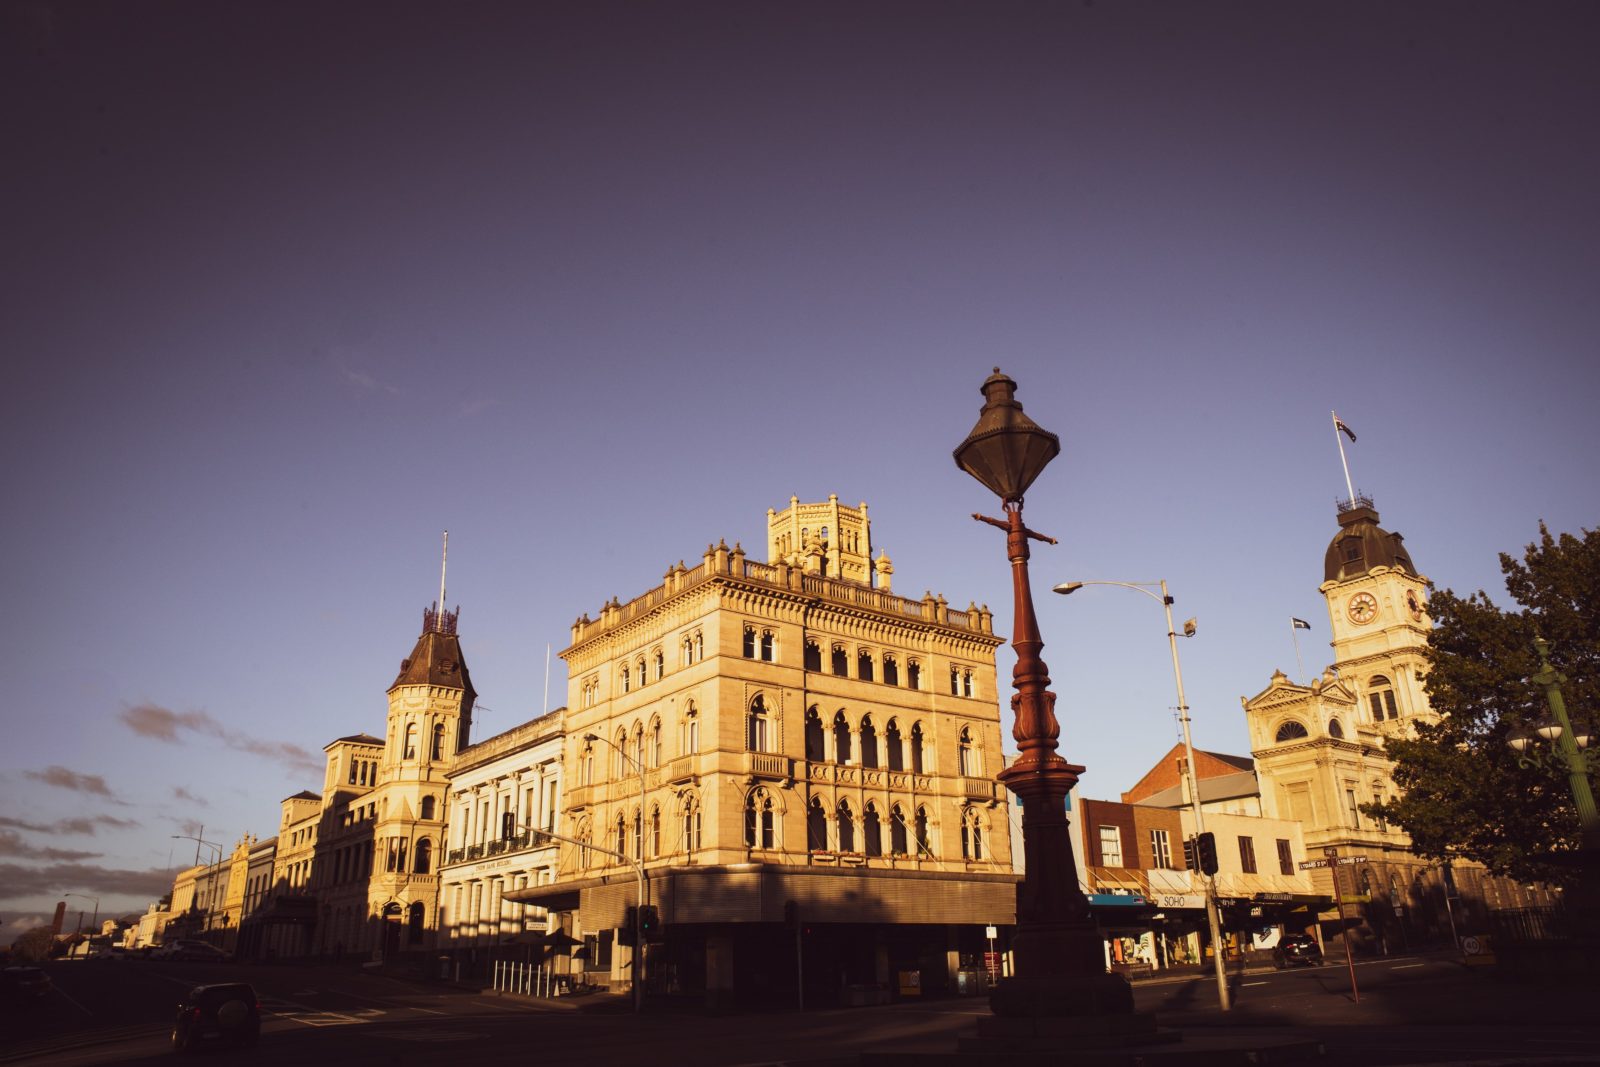 Sturt Street, historic buildings along the self guided tour